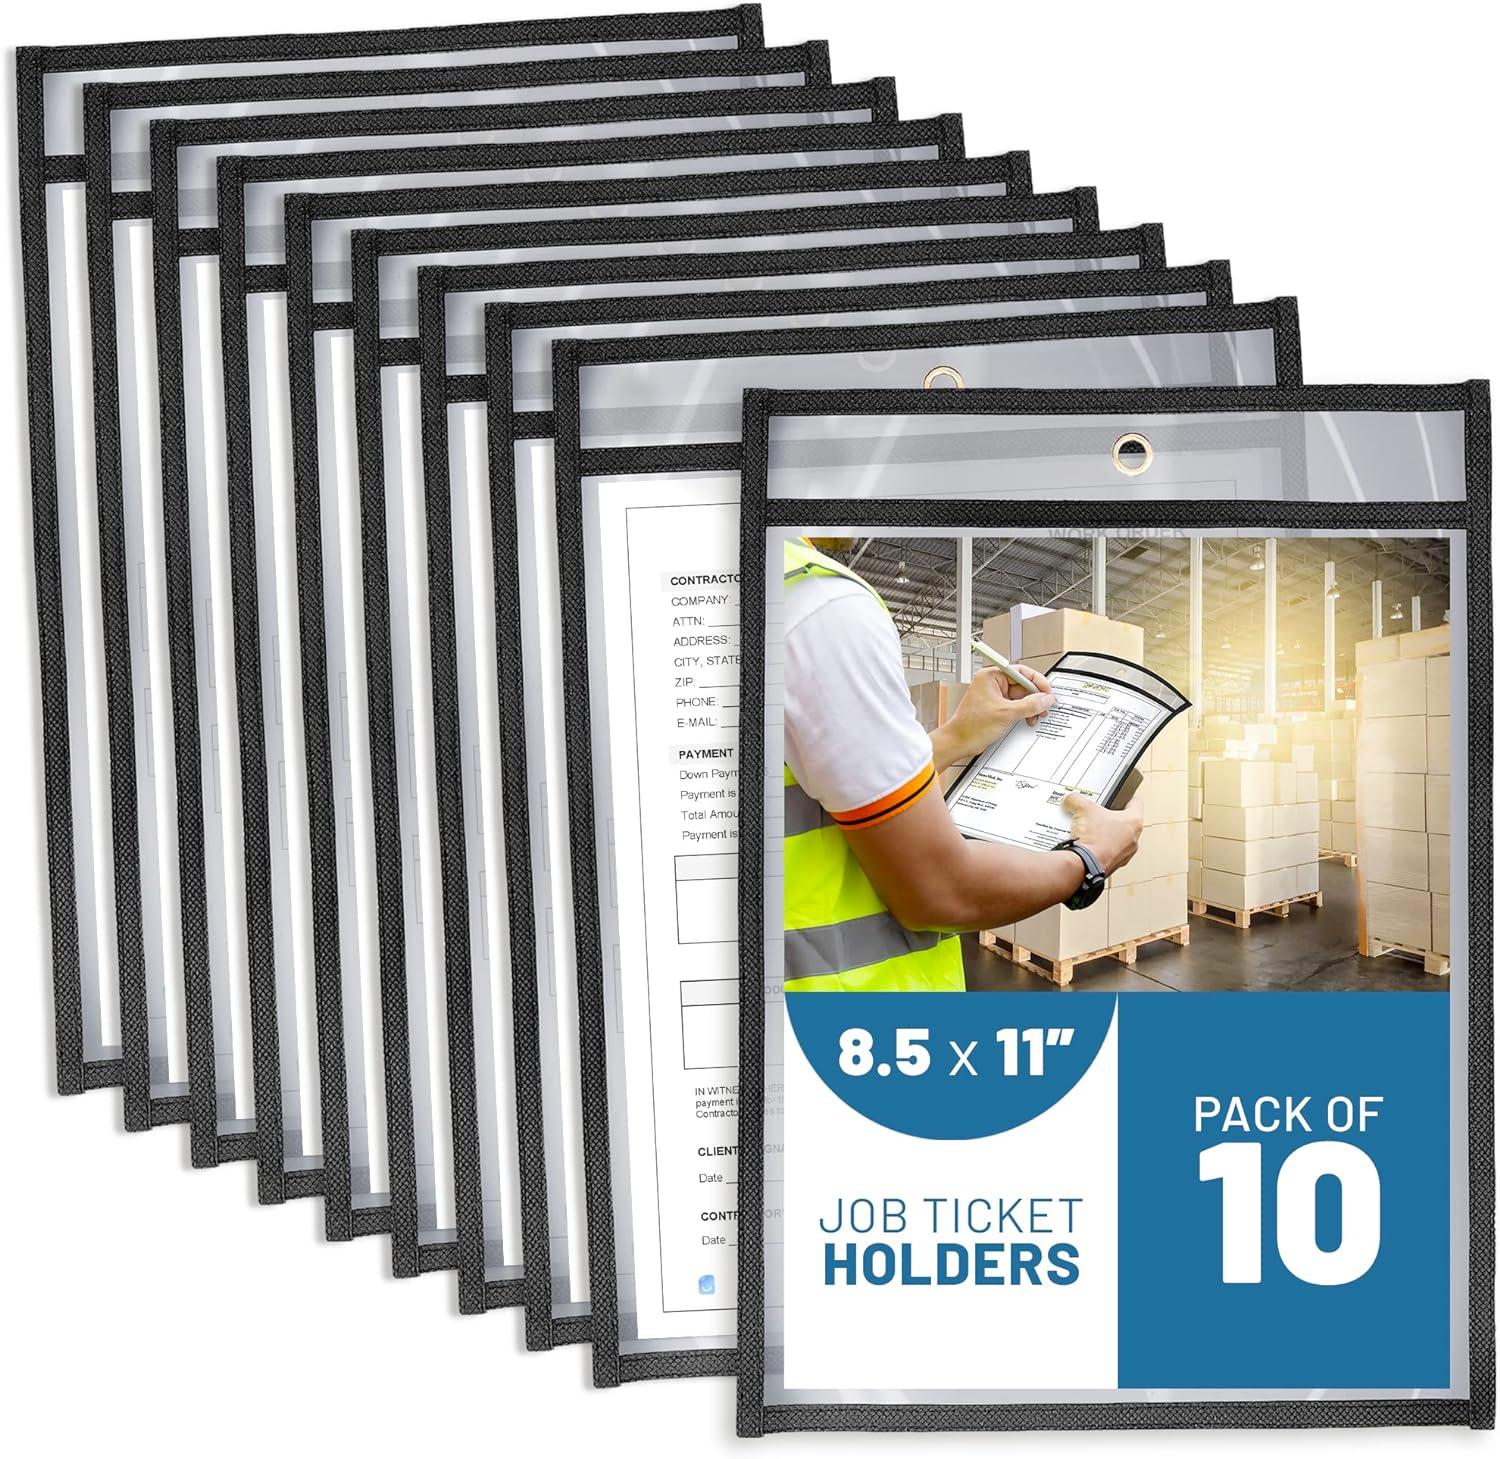 job ticket holders 8 1/2 x 11-10 pack work order plastic sleeves for documents - shop ticket holders - dry